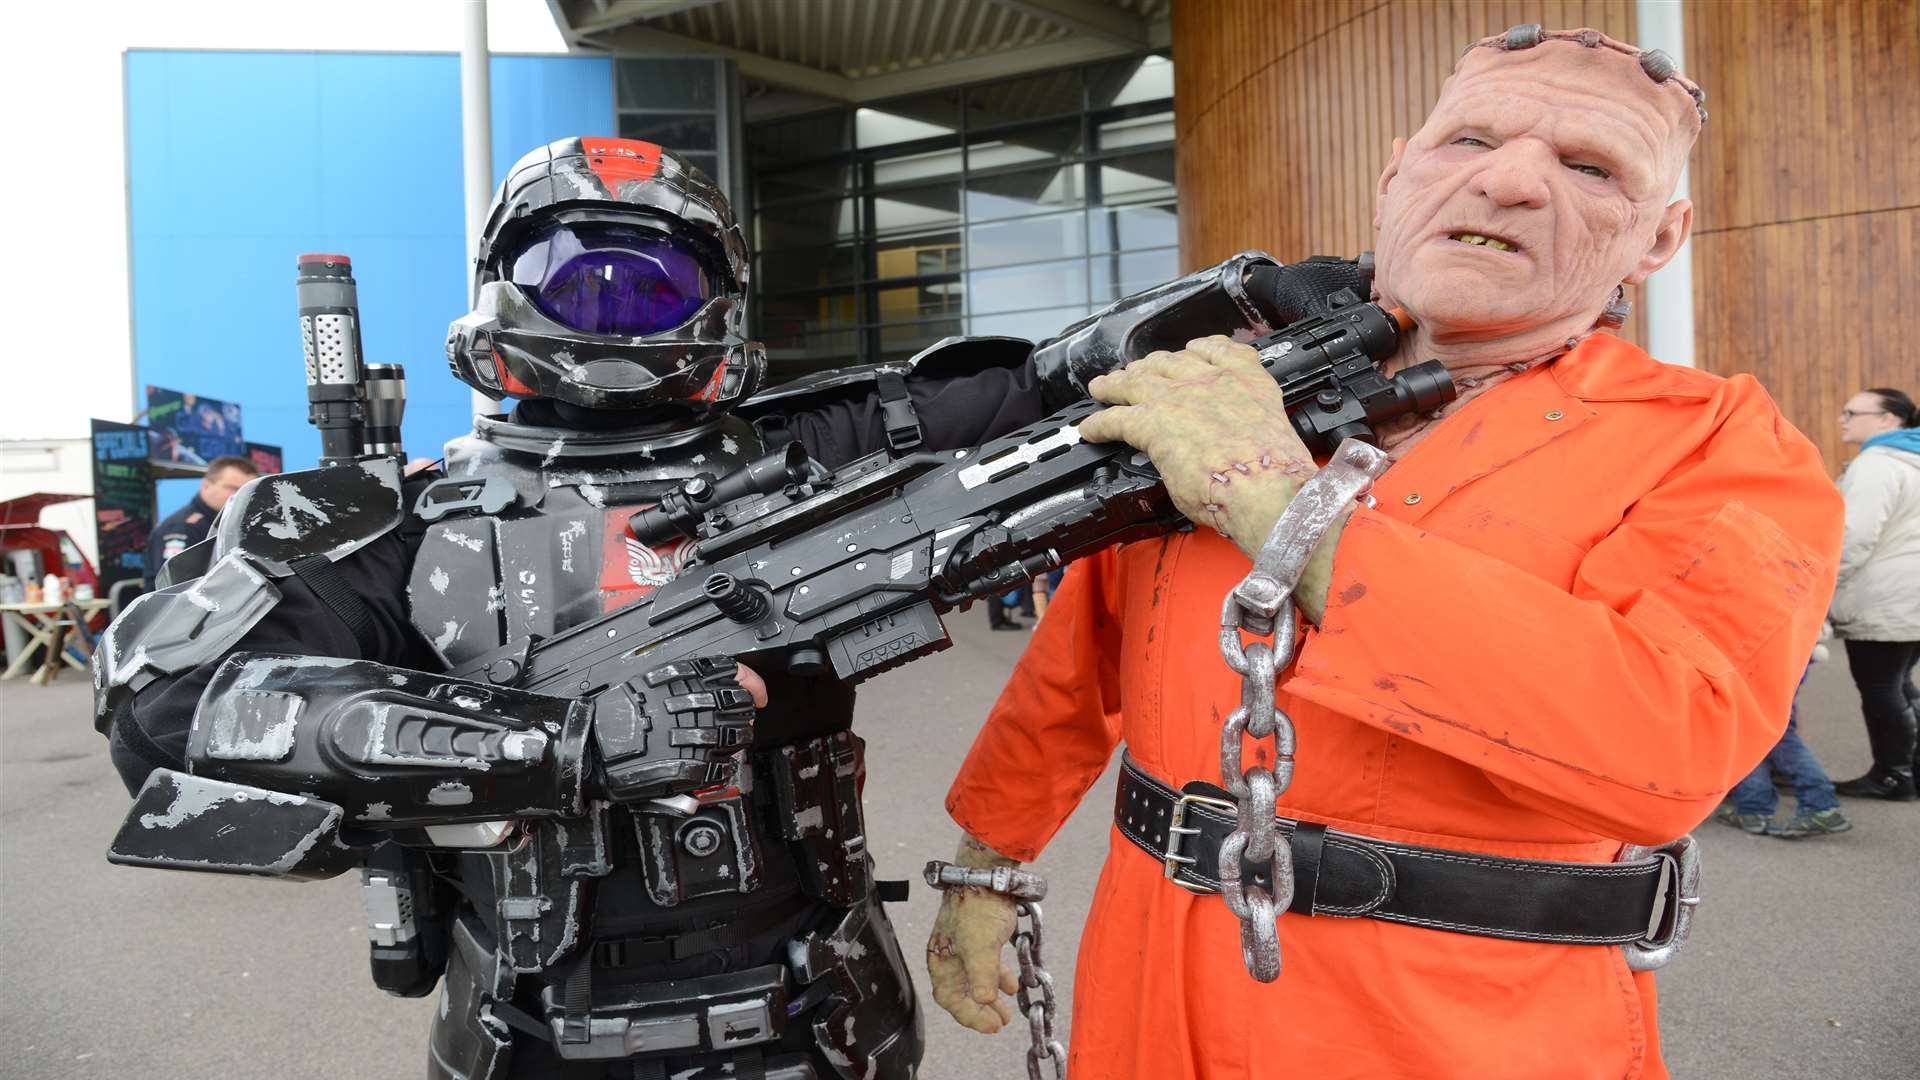 Cybershock battles with with The Experiment at Folkestone Film, TV and Comic Con.